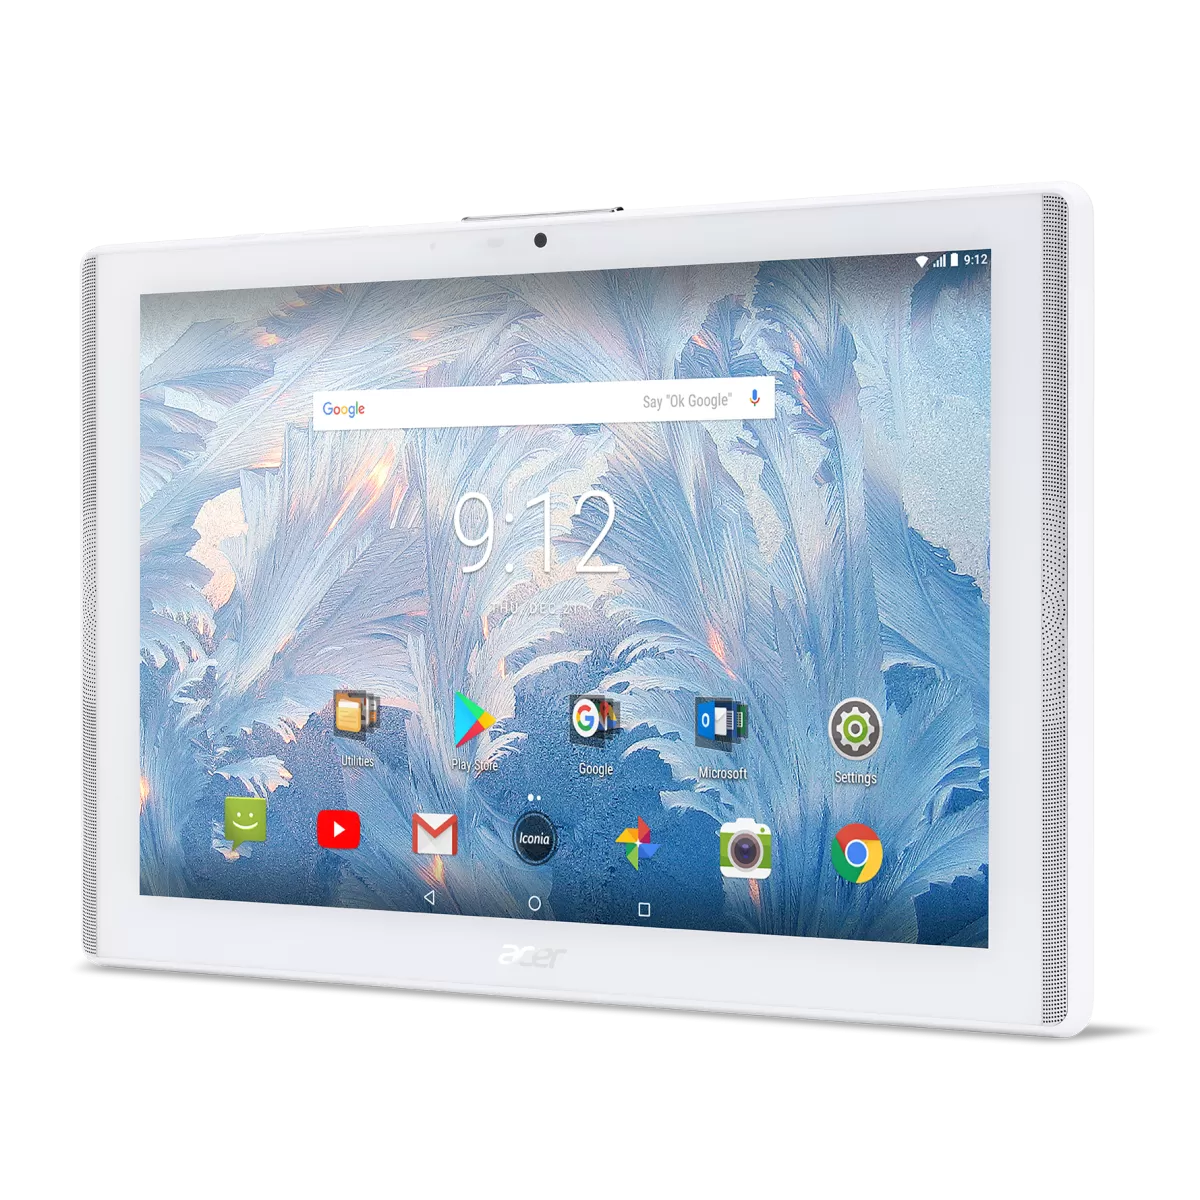 Таблет Tablet Acer Iconia B3A42K8B6 (White) 4G LTE/10.1 WXGA IPS HD (1280x800)/MTK MT8735 quadcore Cortex A53 1.3 GHz/1x2GB LPDDR3, 16GB eMMC/Cam (2MP front), rear 5 MP (2560 x 1920) 1080p FHD/Gsensor, Micro USB, microSD/2cell battery/Android 7.0 (Nougat)